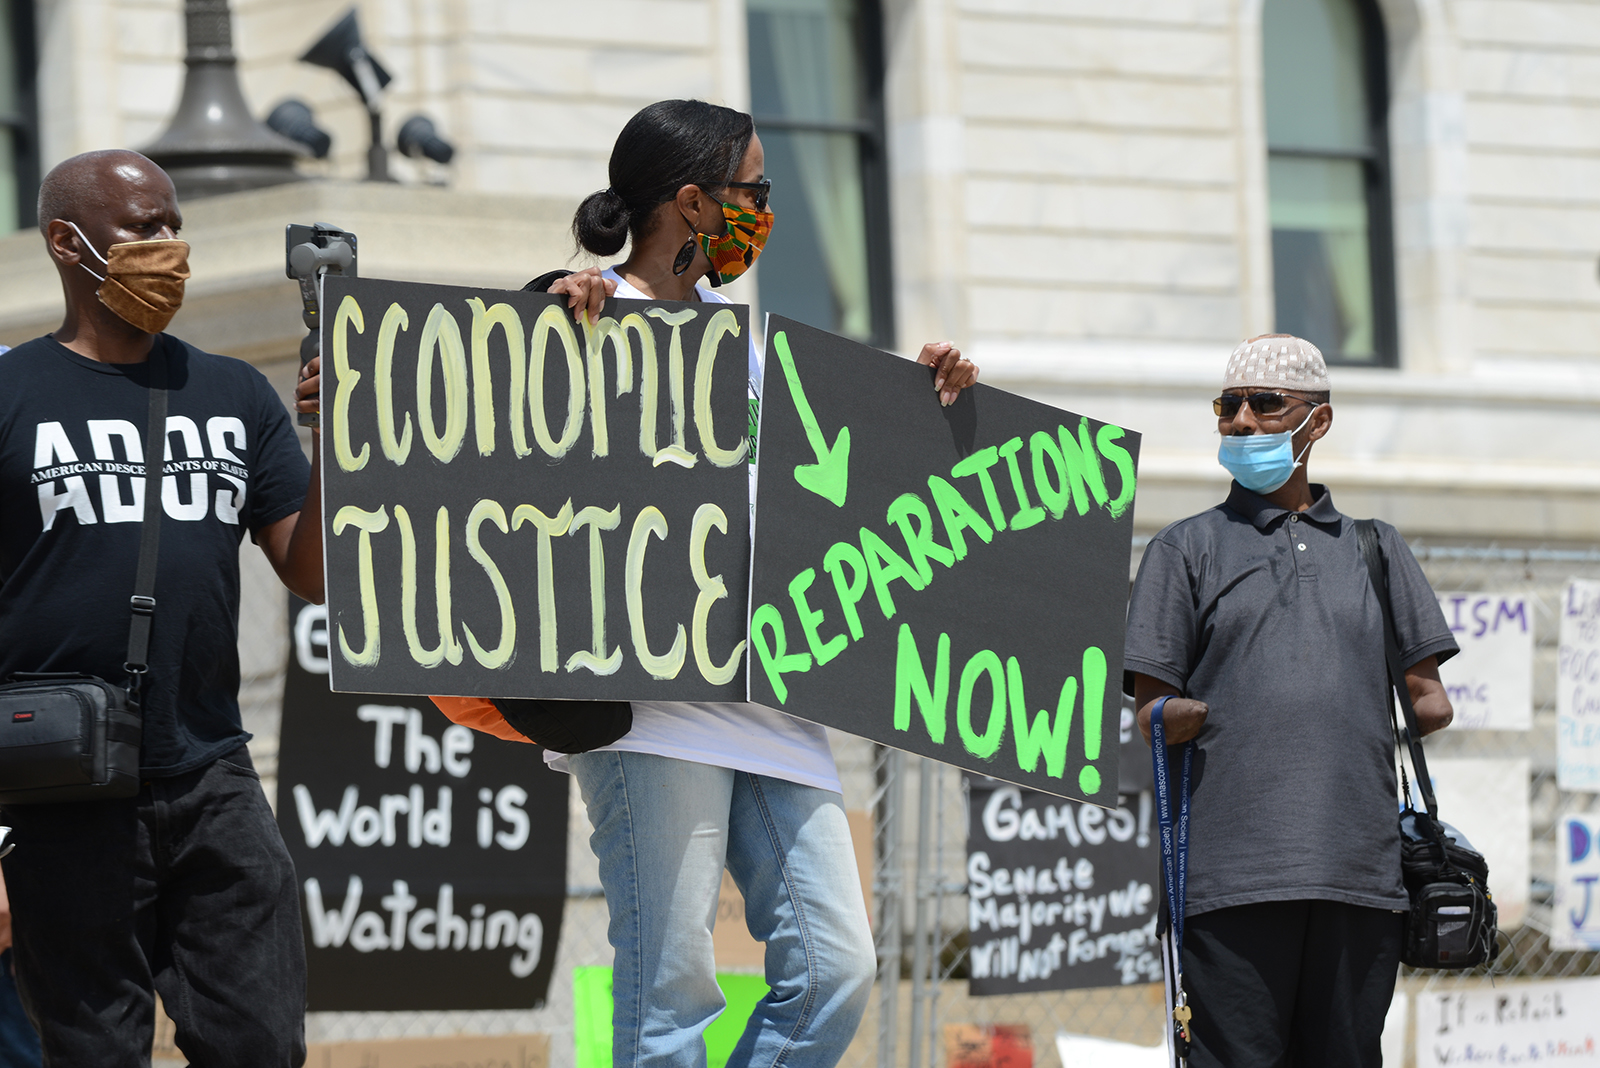 People demonstrate outside the Minnesota capitol building on Juneteenth to demand reparations from the United States government for years of slavery, Jim Crow, segregation, redlining, and violence against black people from police, on June 19, 2020, in St. Paul, Minnesota. Photo by Fibonacci Blue/Creative Commons